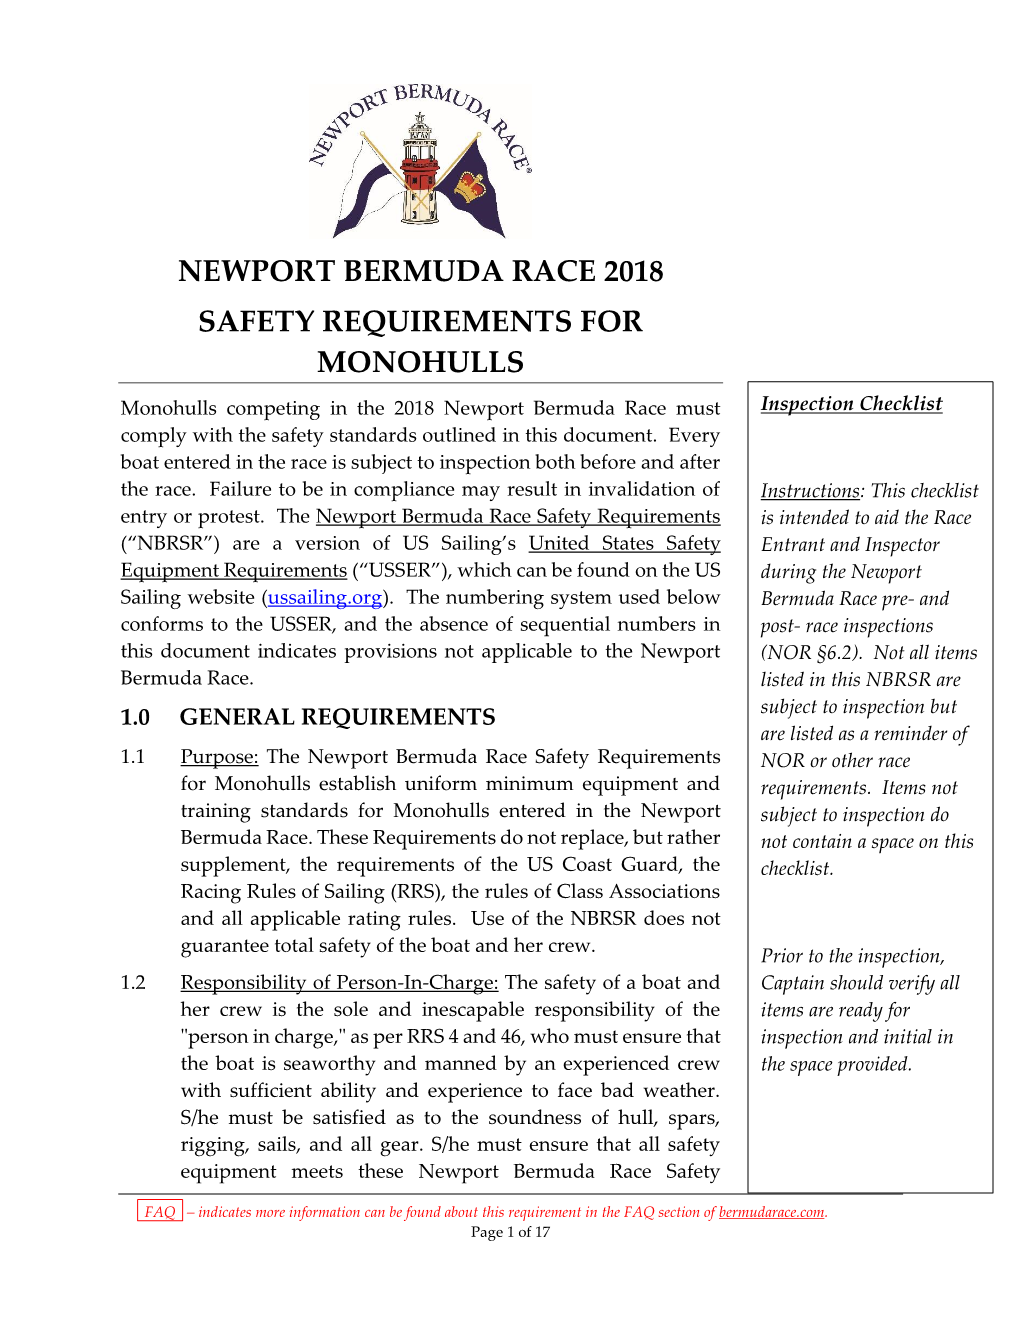 Safety Requirements for Monohulls Checklist Version